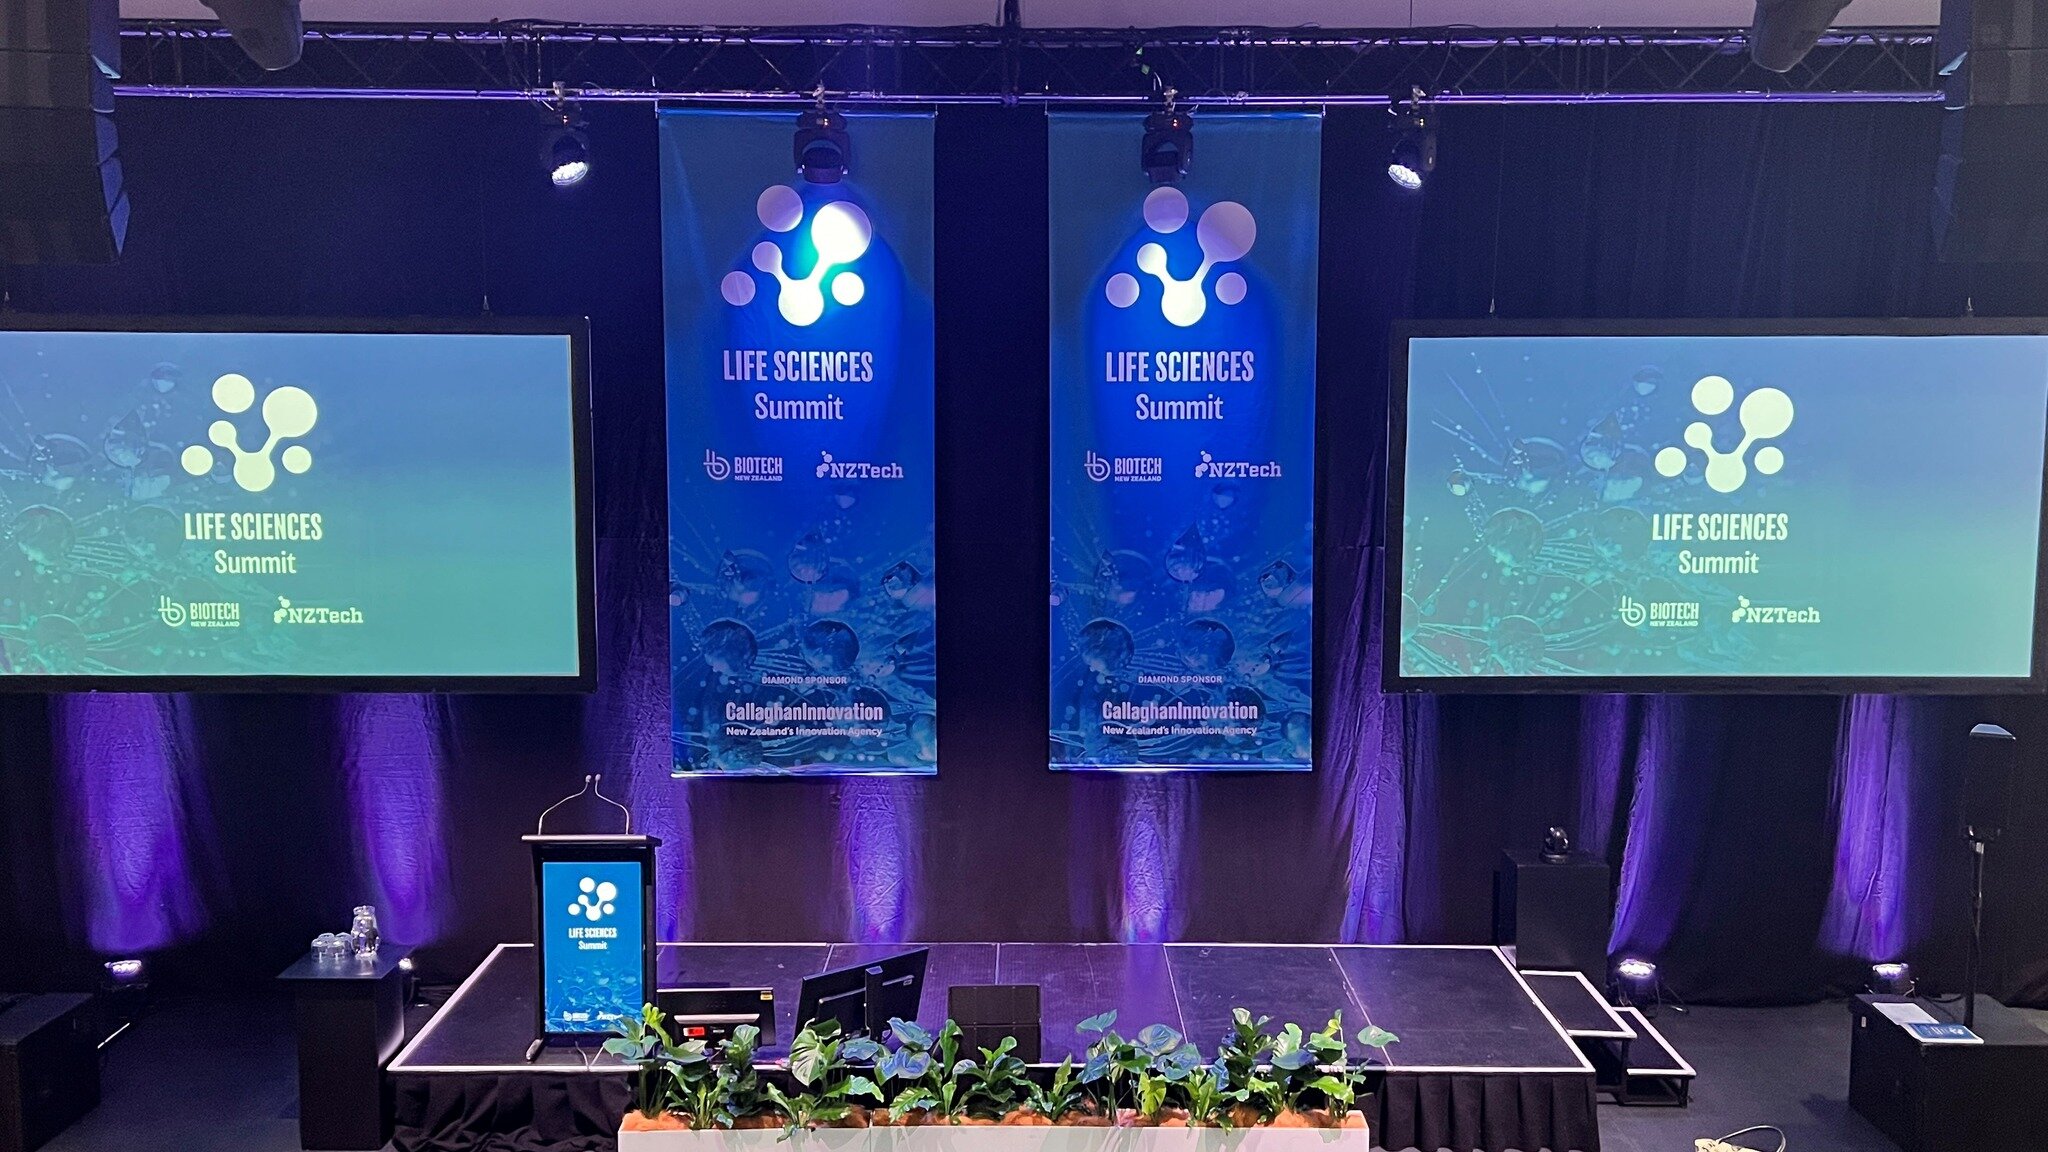 We're all set and ready to go for the 2023 Life Sciences Summit at Shed 6 in Wellington!

#SpyglassProduction #NWGroup #lifesciences2023 #biotechnz #seetomorrowfirst